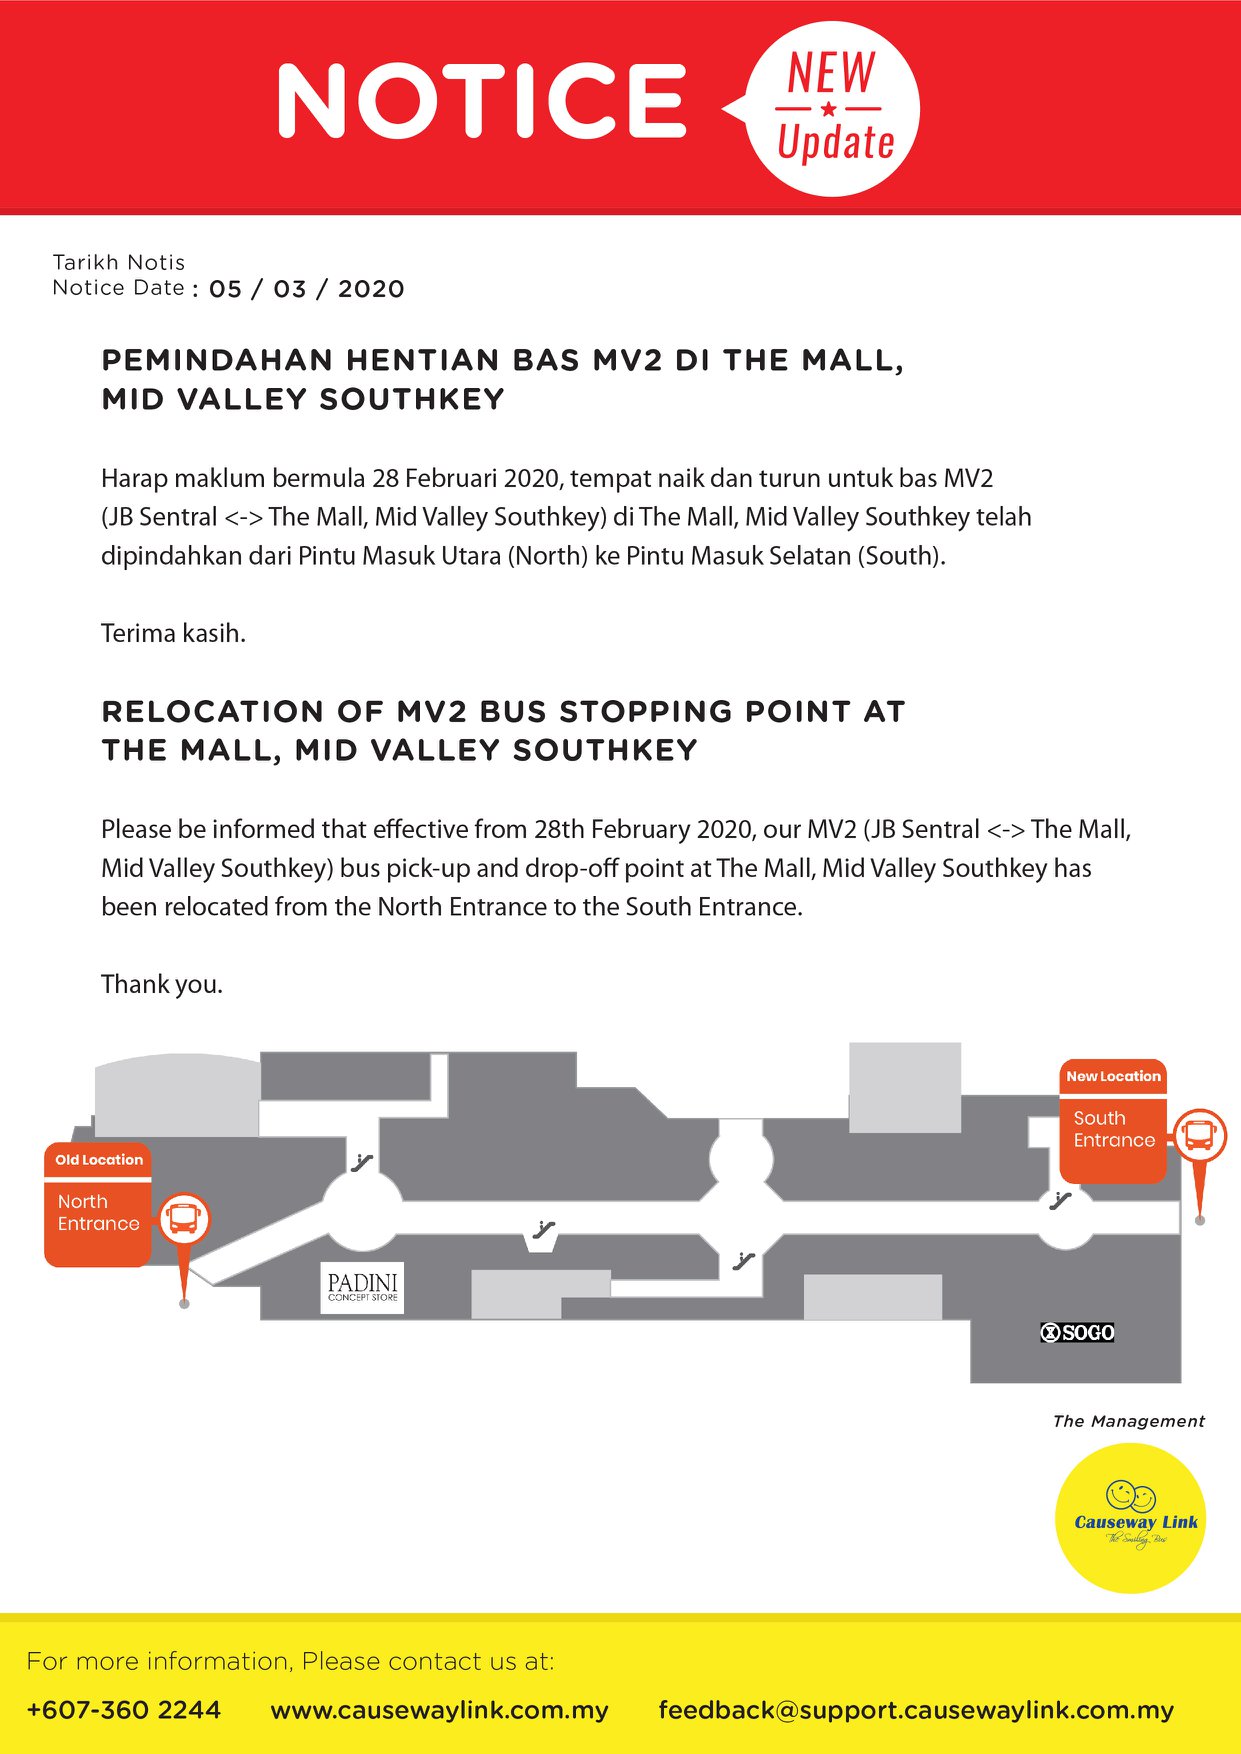 Official poster on relocation of MV2 boarding point at Mid Valley Southkey